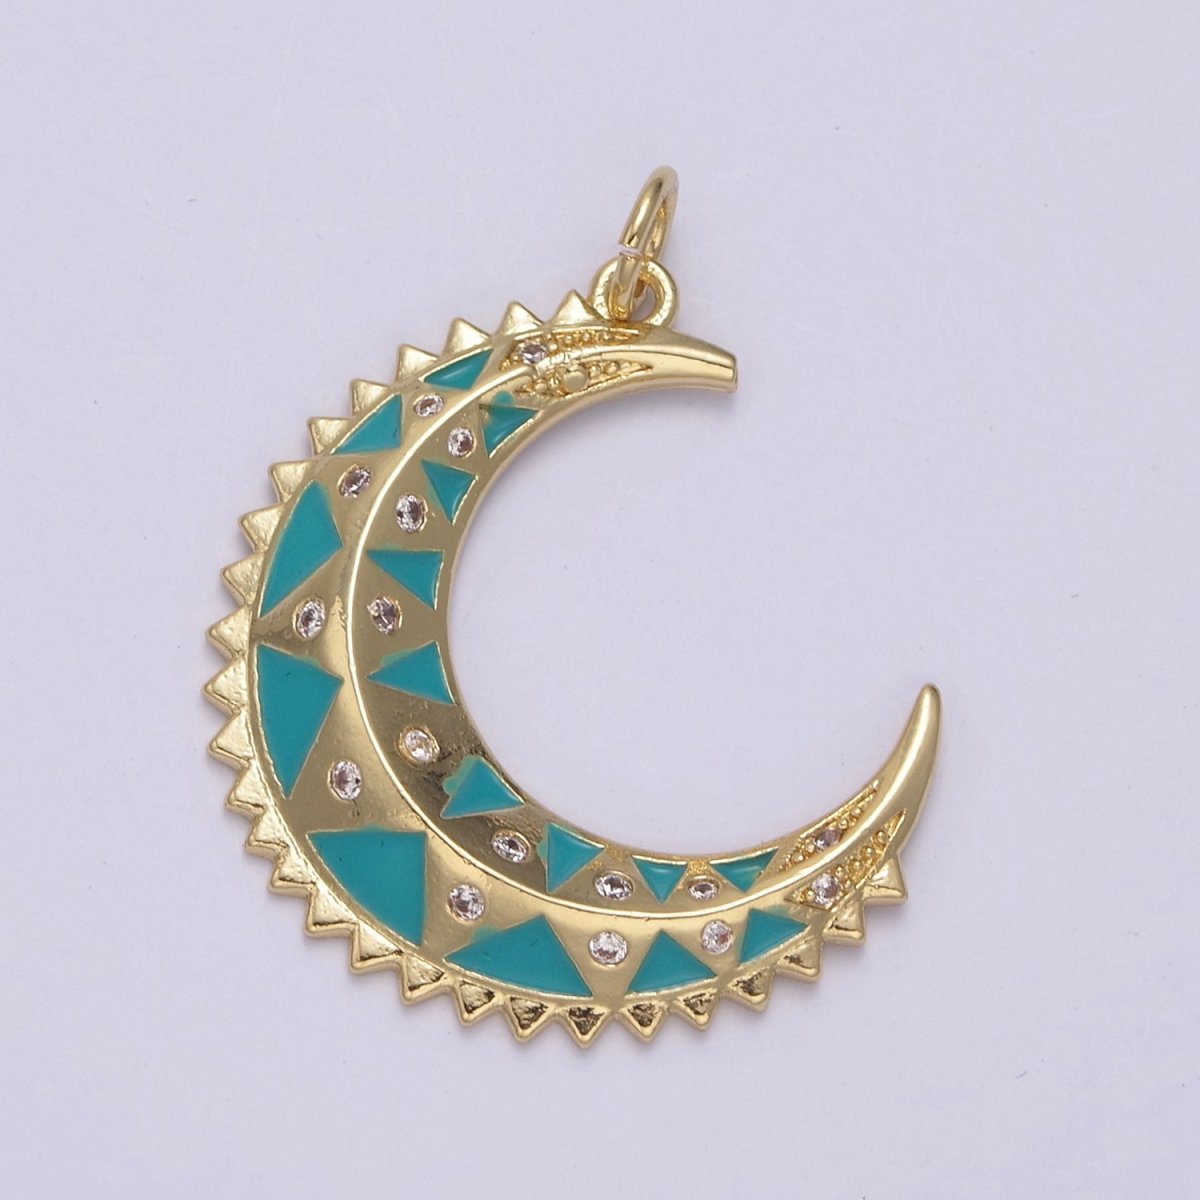 Dainty Enamel Crescent Moon Charm, Celestial Jewelry Gold Moon Pendant, 14K Gold Filled Moon Charm Pendant for Necklace Bracelet Charm Supply N-736 - N-743 - DLUXCA